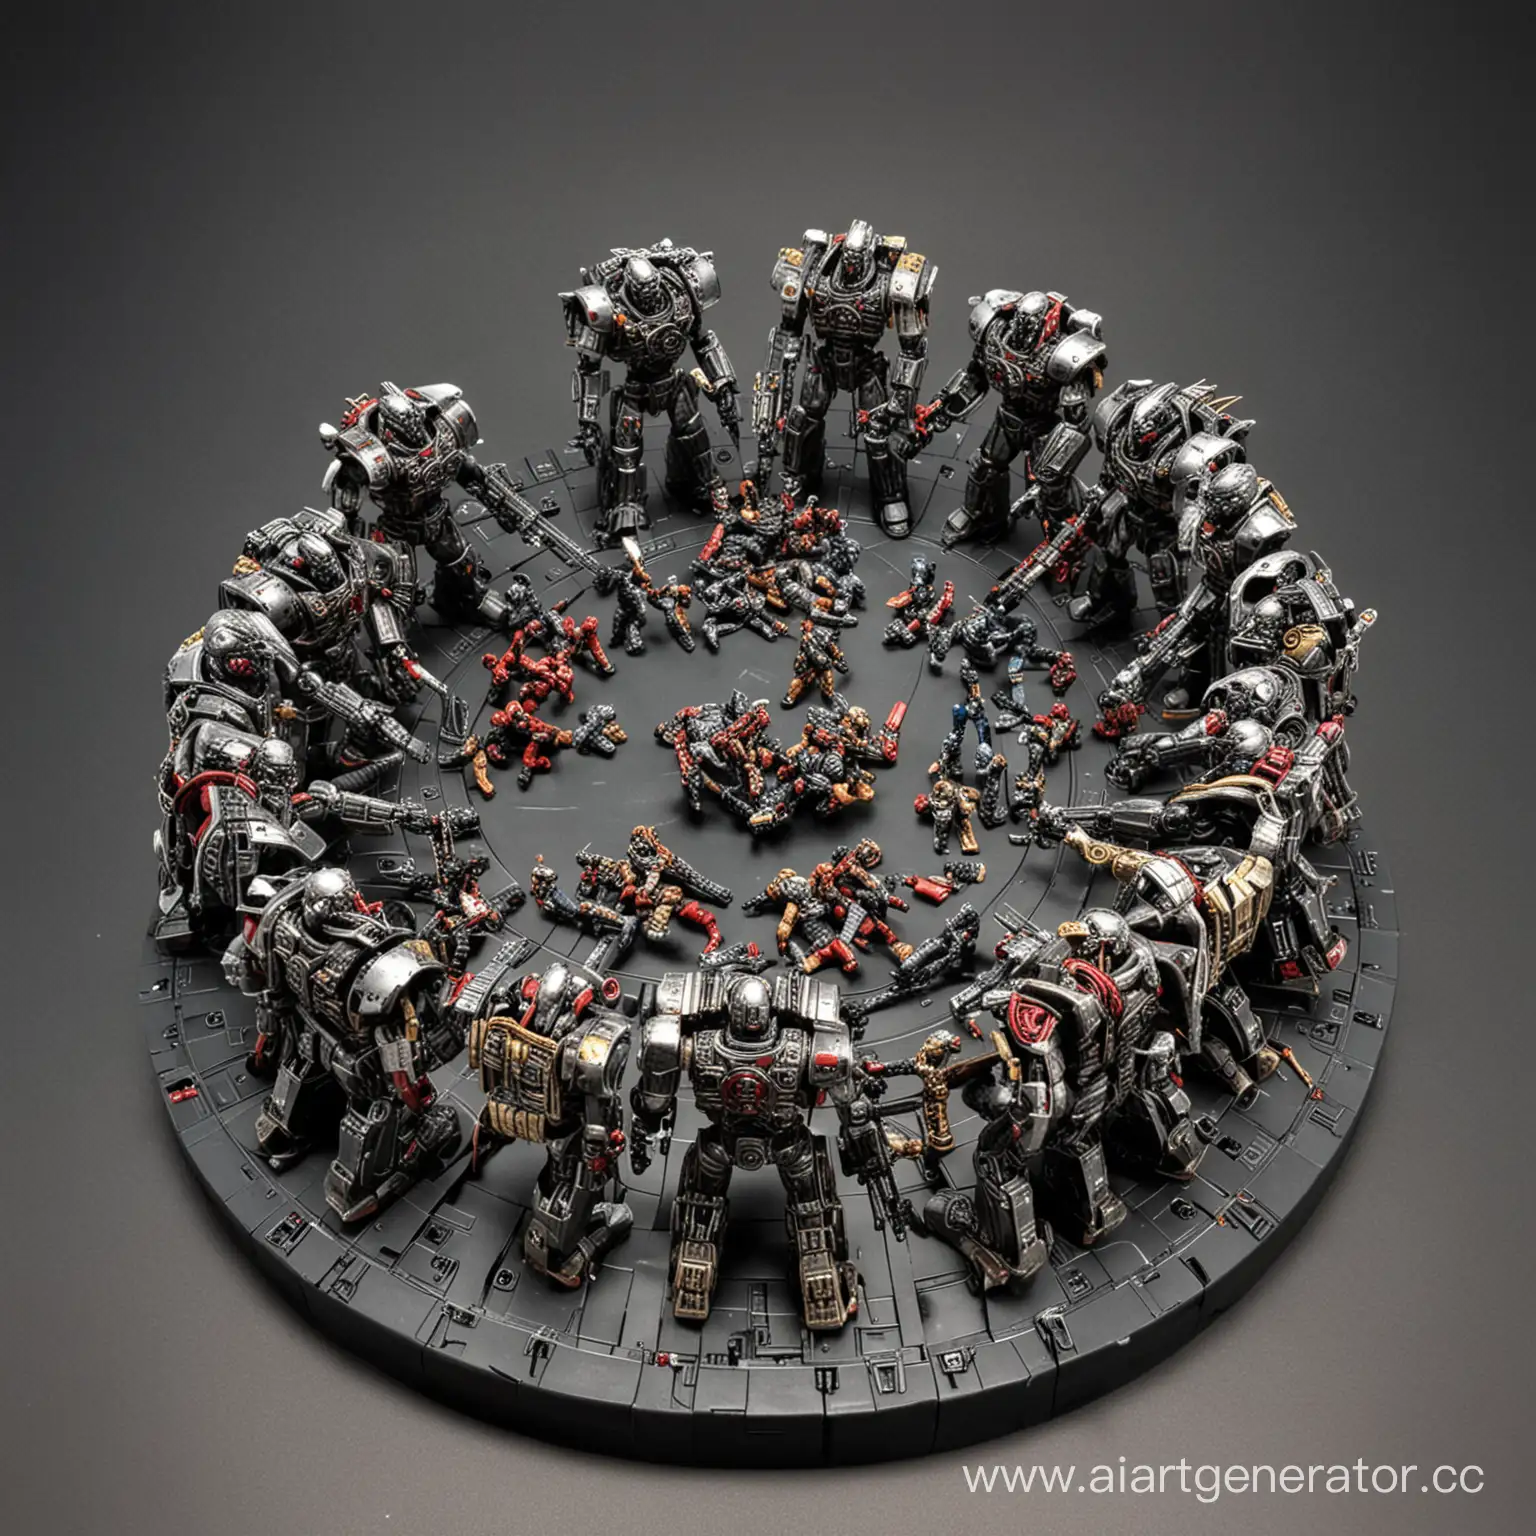 Group-of-Terminator-Robots-Forming-a-Circle